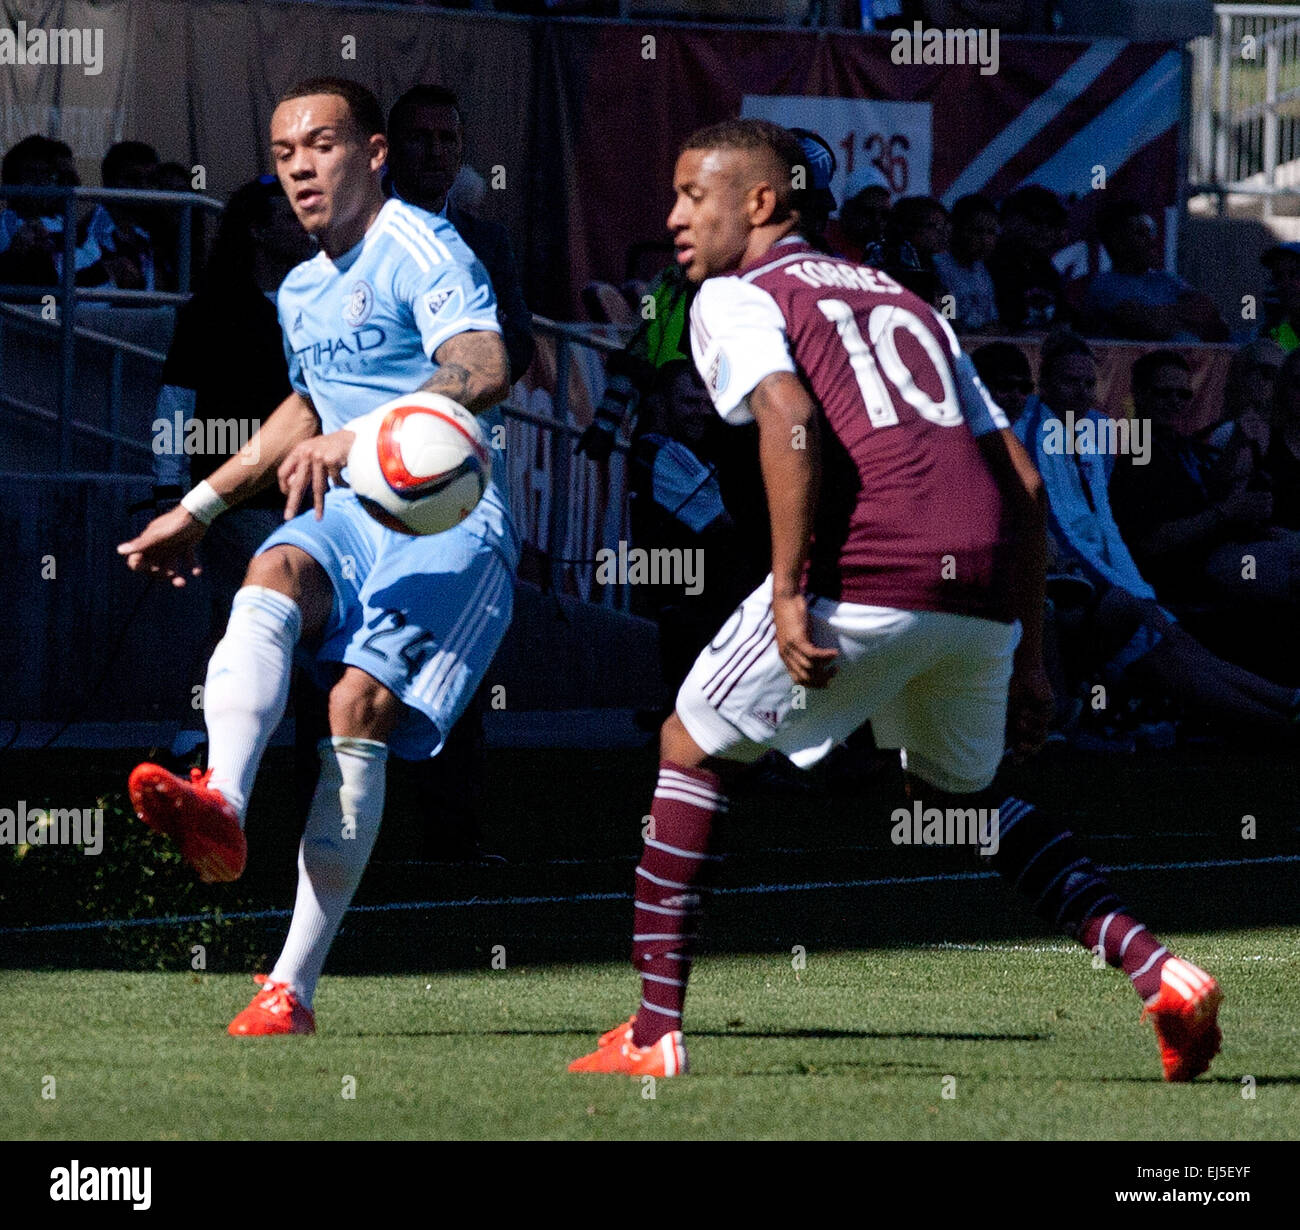 Commerce City, Colorado, USA. 21st Mar, 2015. NY City Mid. SABASTIAN VELASQUEZ, left, makes a pass to a team mate with Rapids F GABRIEL TORRES, right, defends during the 1st. Half at Dicks Sporting Goods Park during the Rapids Home Opener Saturday afternoon. Rapids & New York City FC draw to 0-0. © Hector Acevedo/ZUMA Wire/Alamy Live News Stock Photo